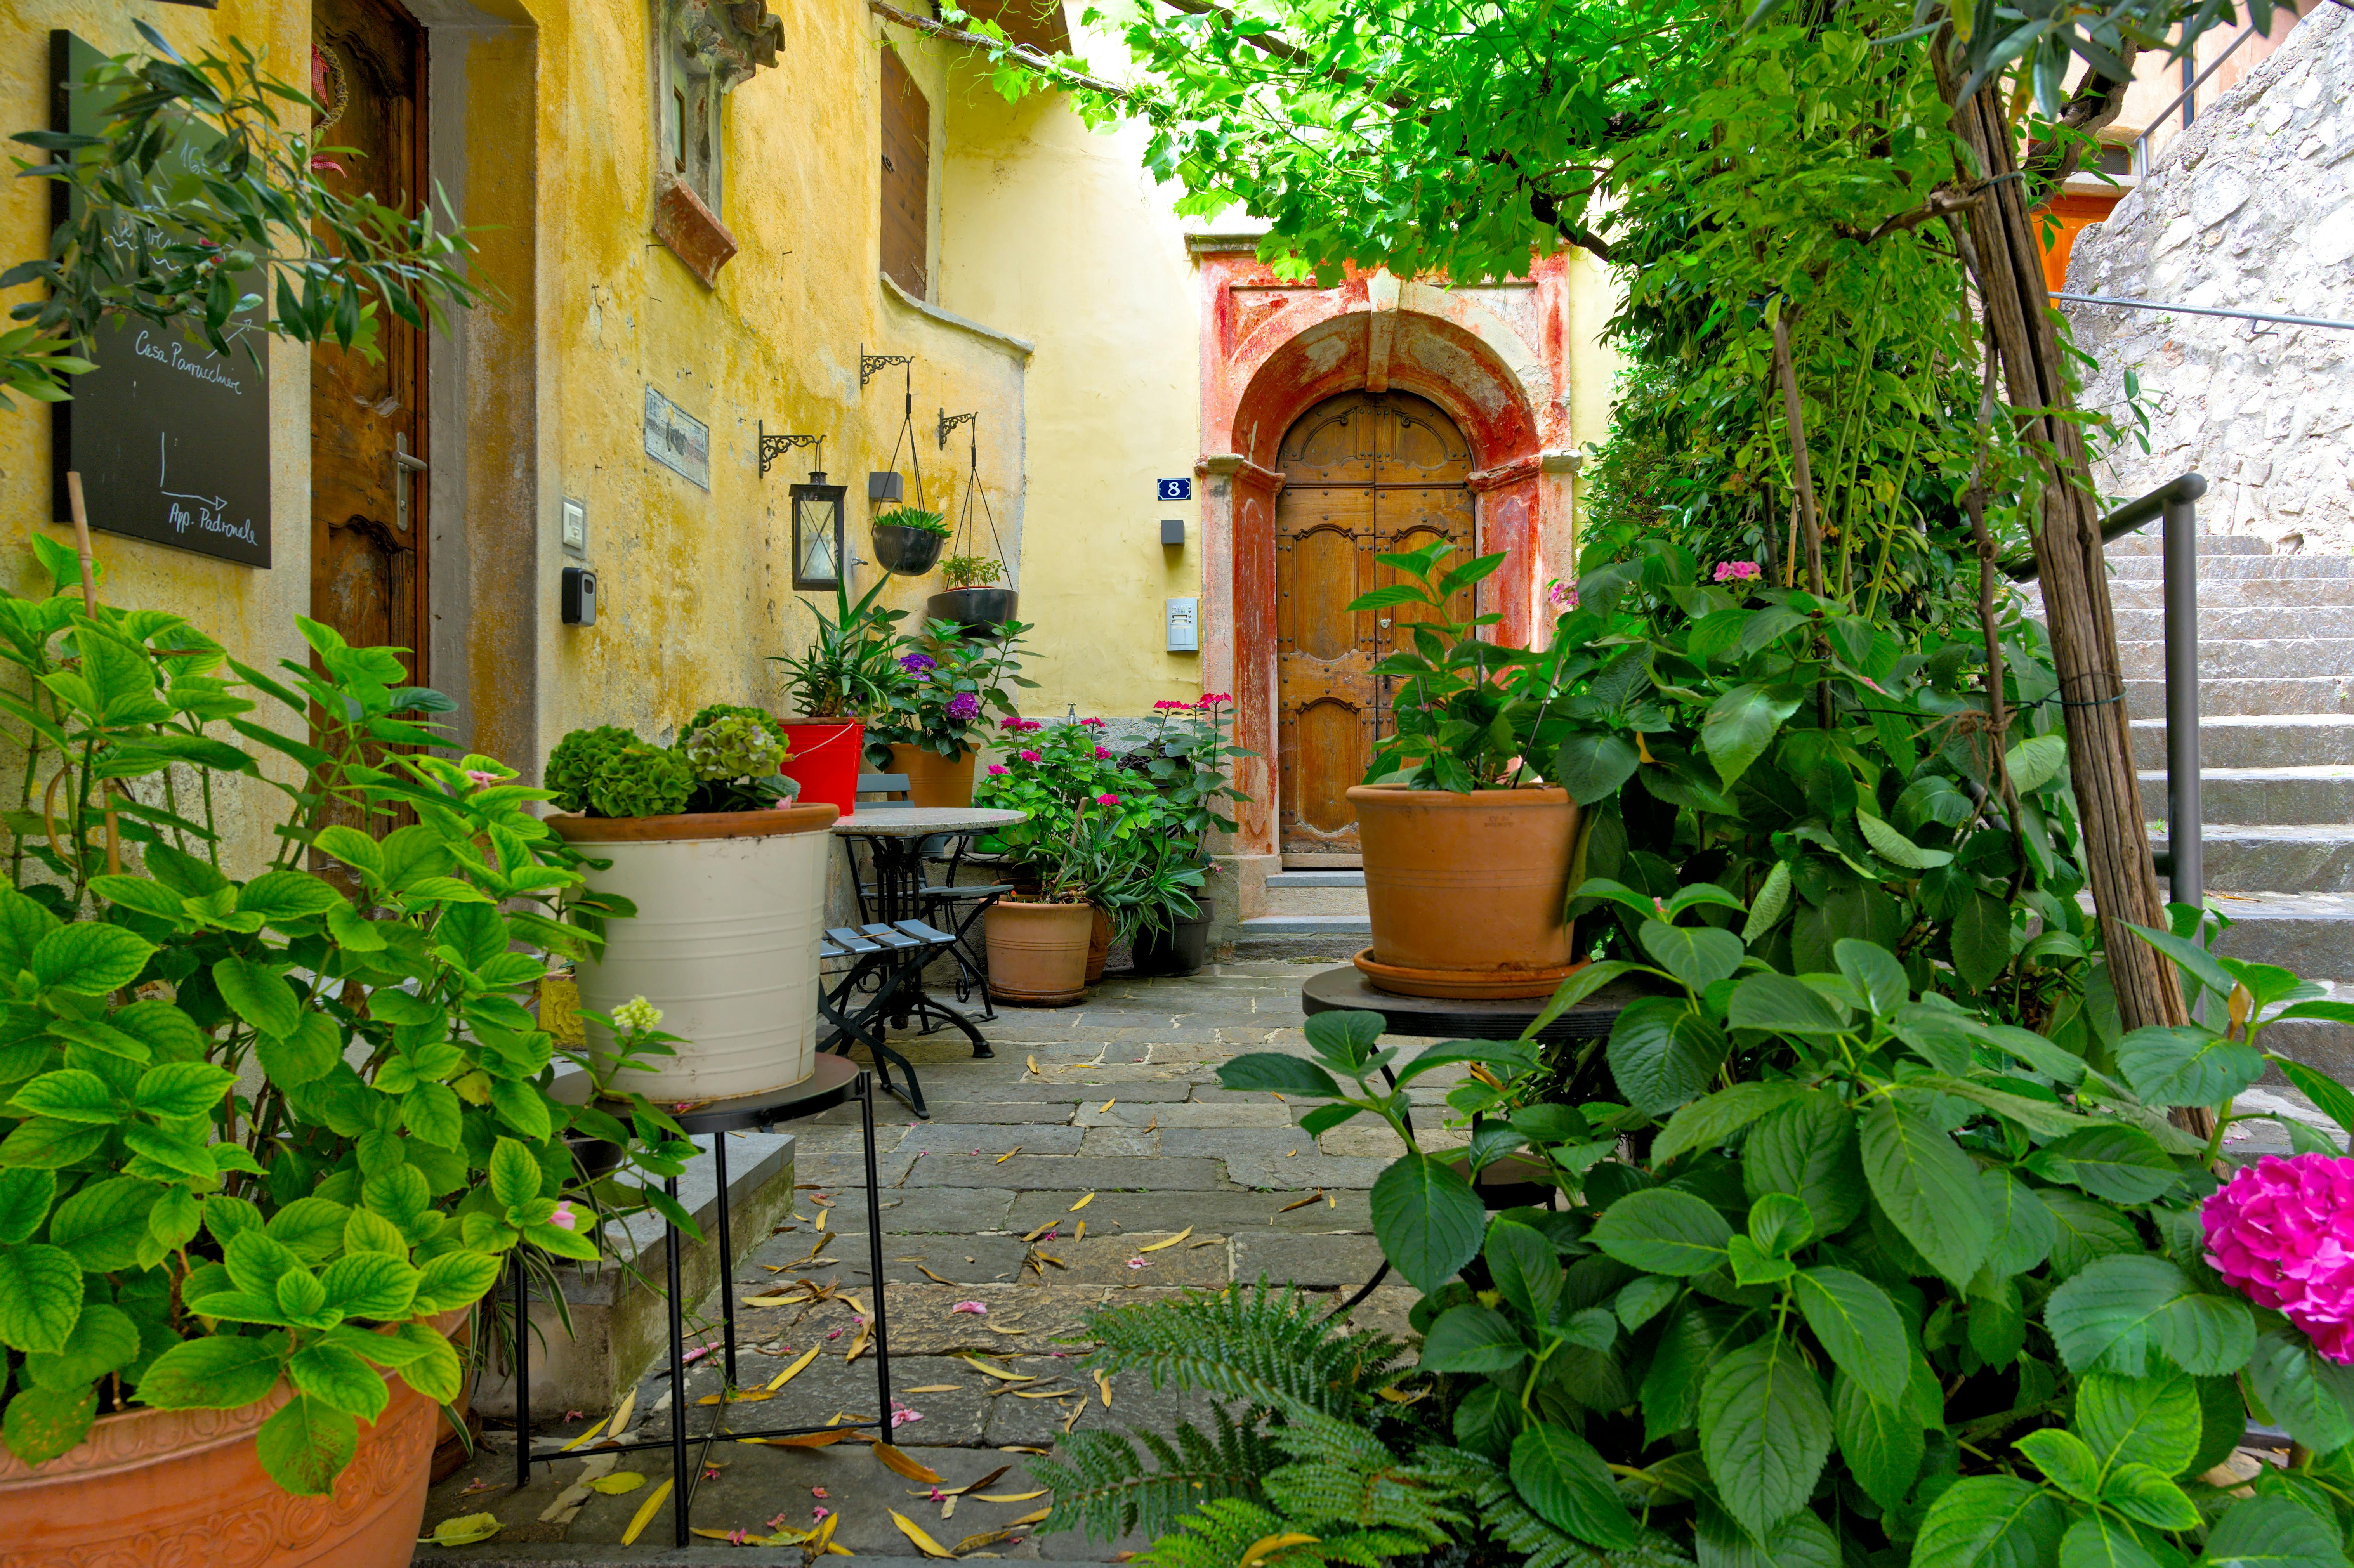 Potted Plants in a Courtyard of Residential Buildings